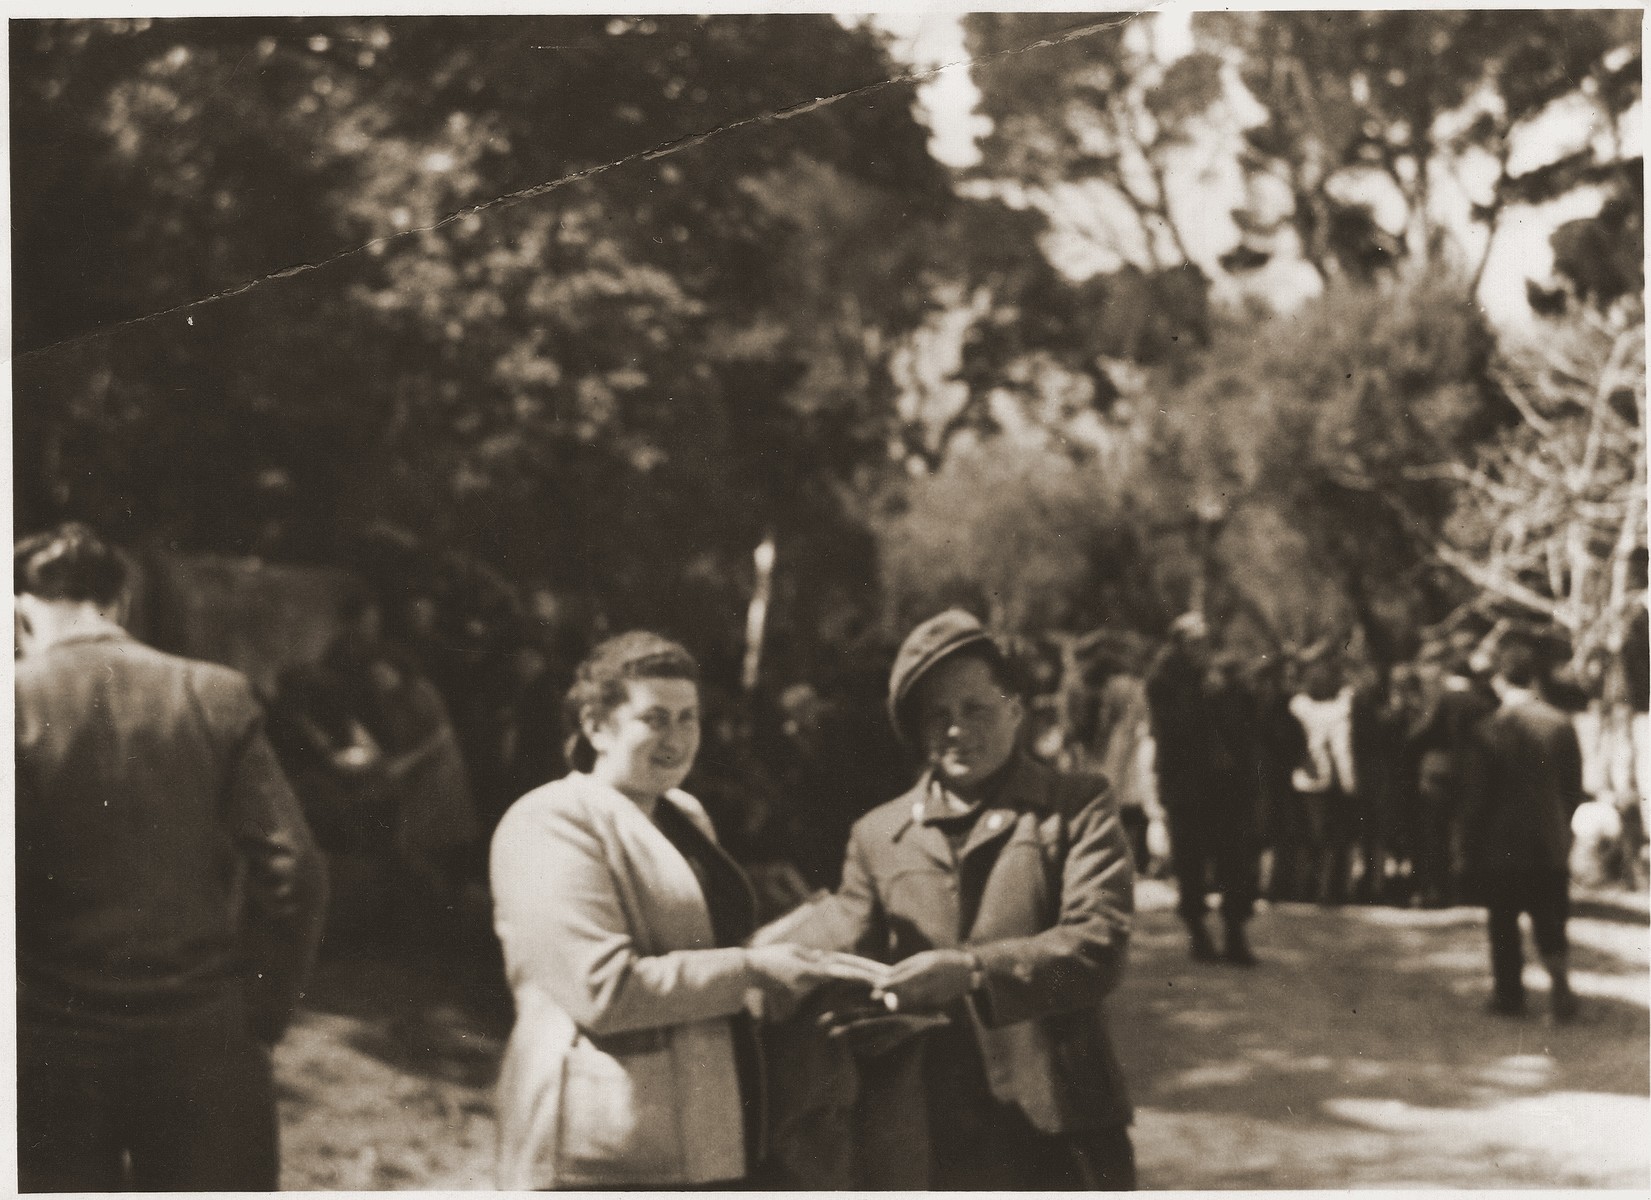 Hadassah Bimko and poses with another DP at the Marsylia transit camp (a former Yugoslav POW camp) in Marseilles.

Bimko icame to Marseilles to accompany a transport of Jewish orphans from the Bergen-Belsen displaced persons' camp who will  board the SS Champollion for Palestine.